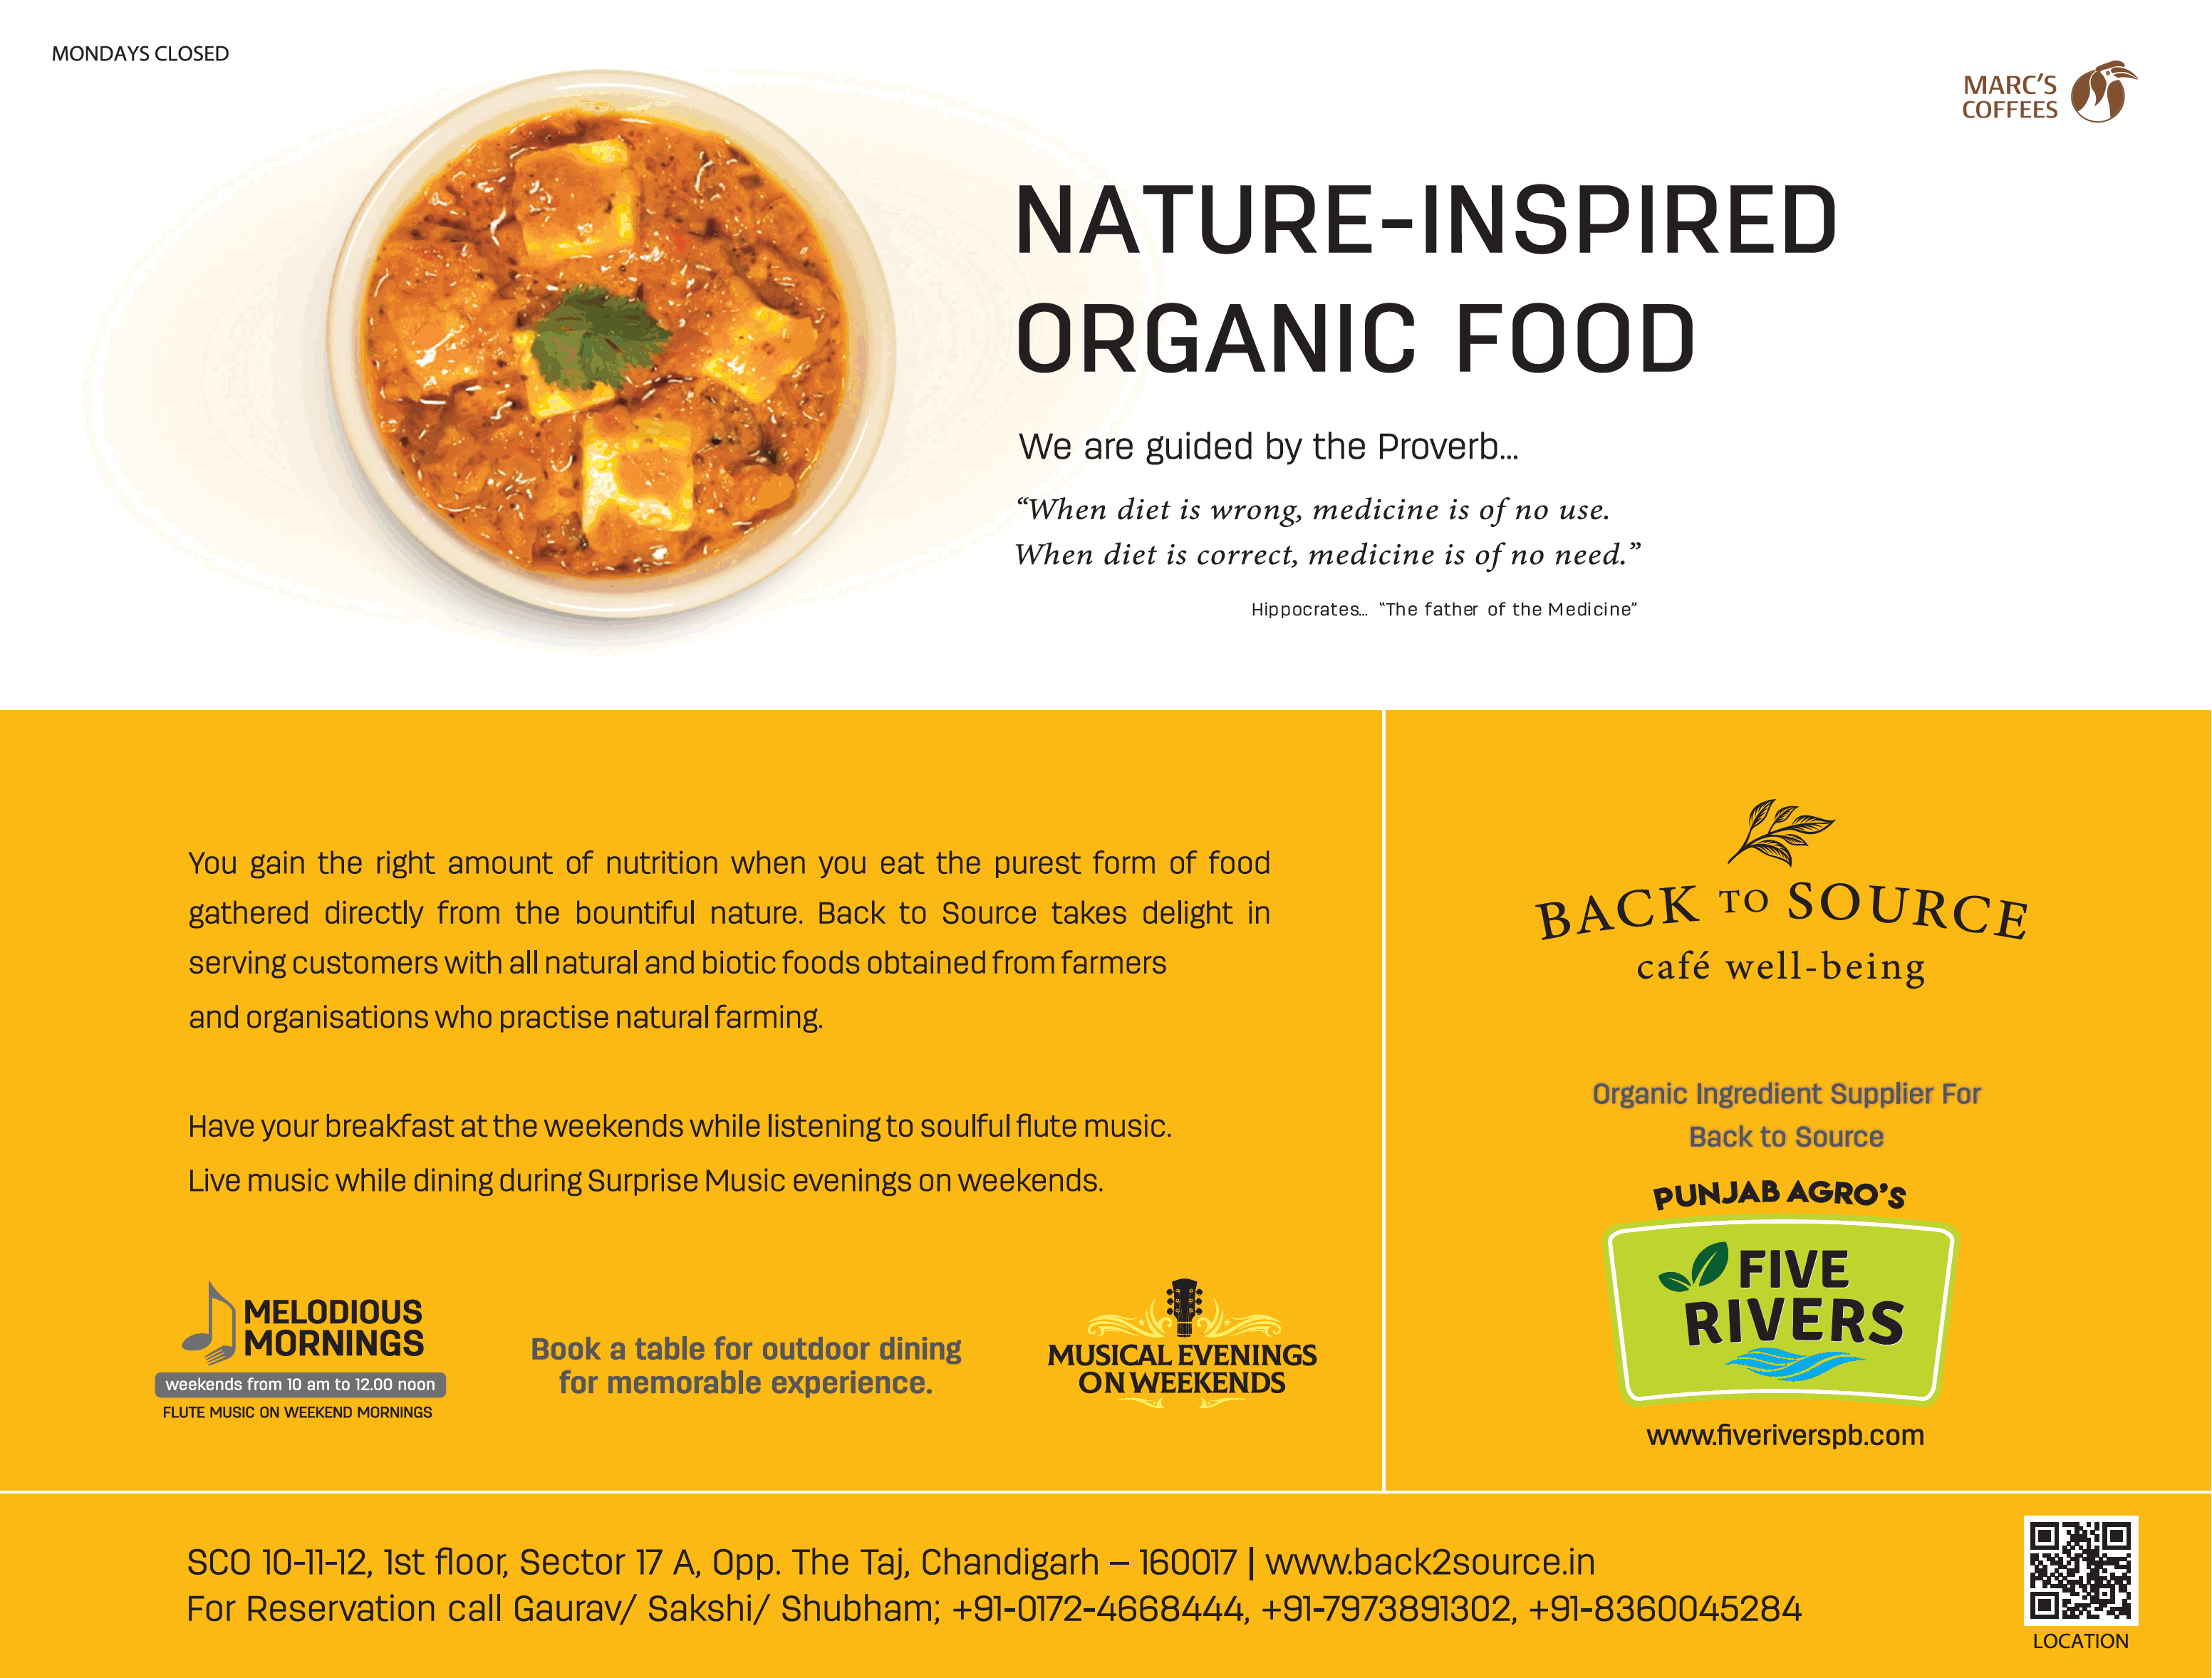 marcs-coffees-back-to-source-cafe-well-being-nature-inspired-organic-food-punjab-agros-five-rivers-ad-times-of-india-chandigarh-10-7-2021